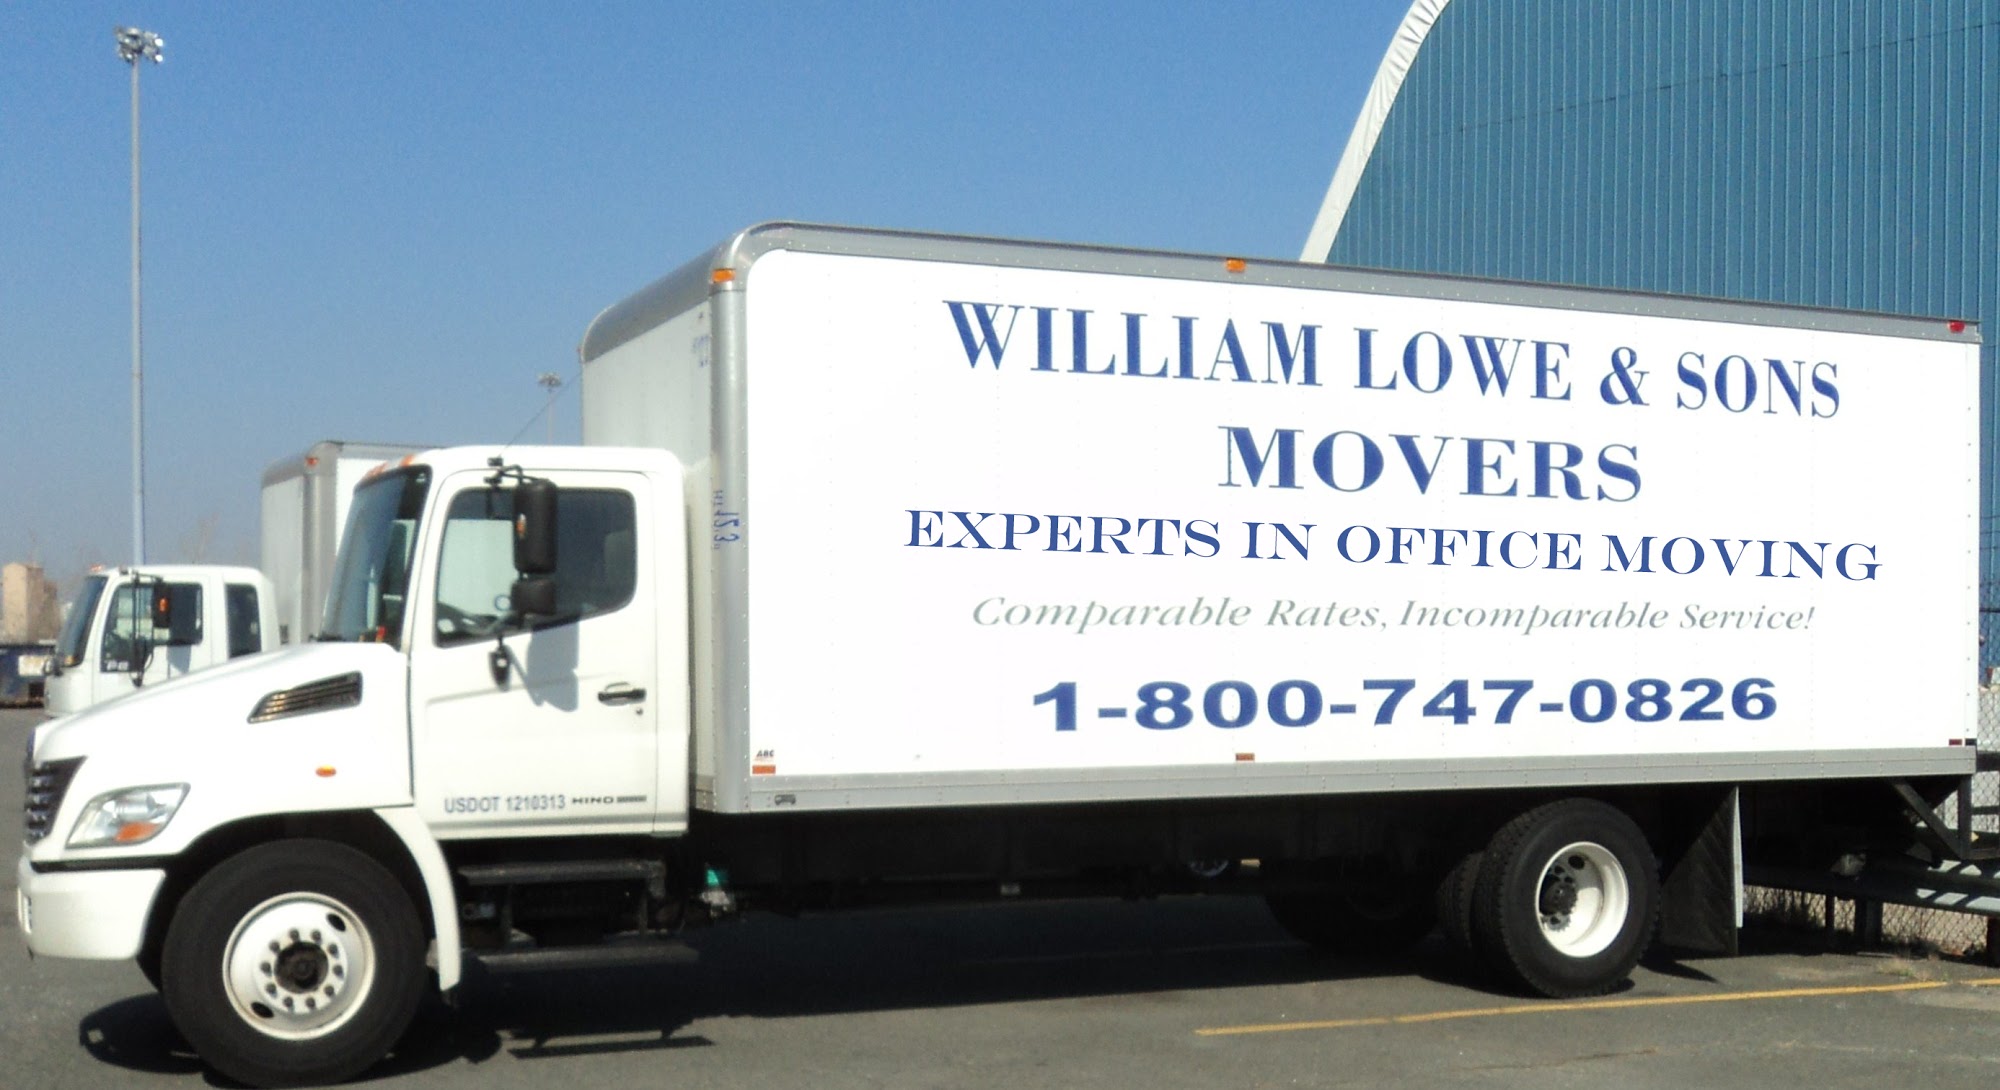 William Lowe & Sons Movers